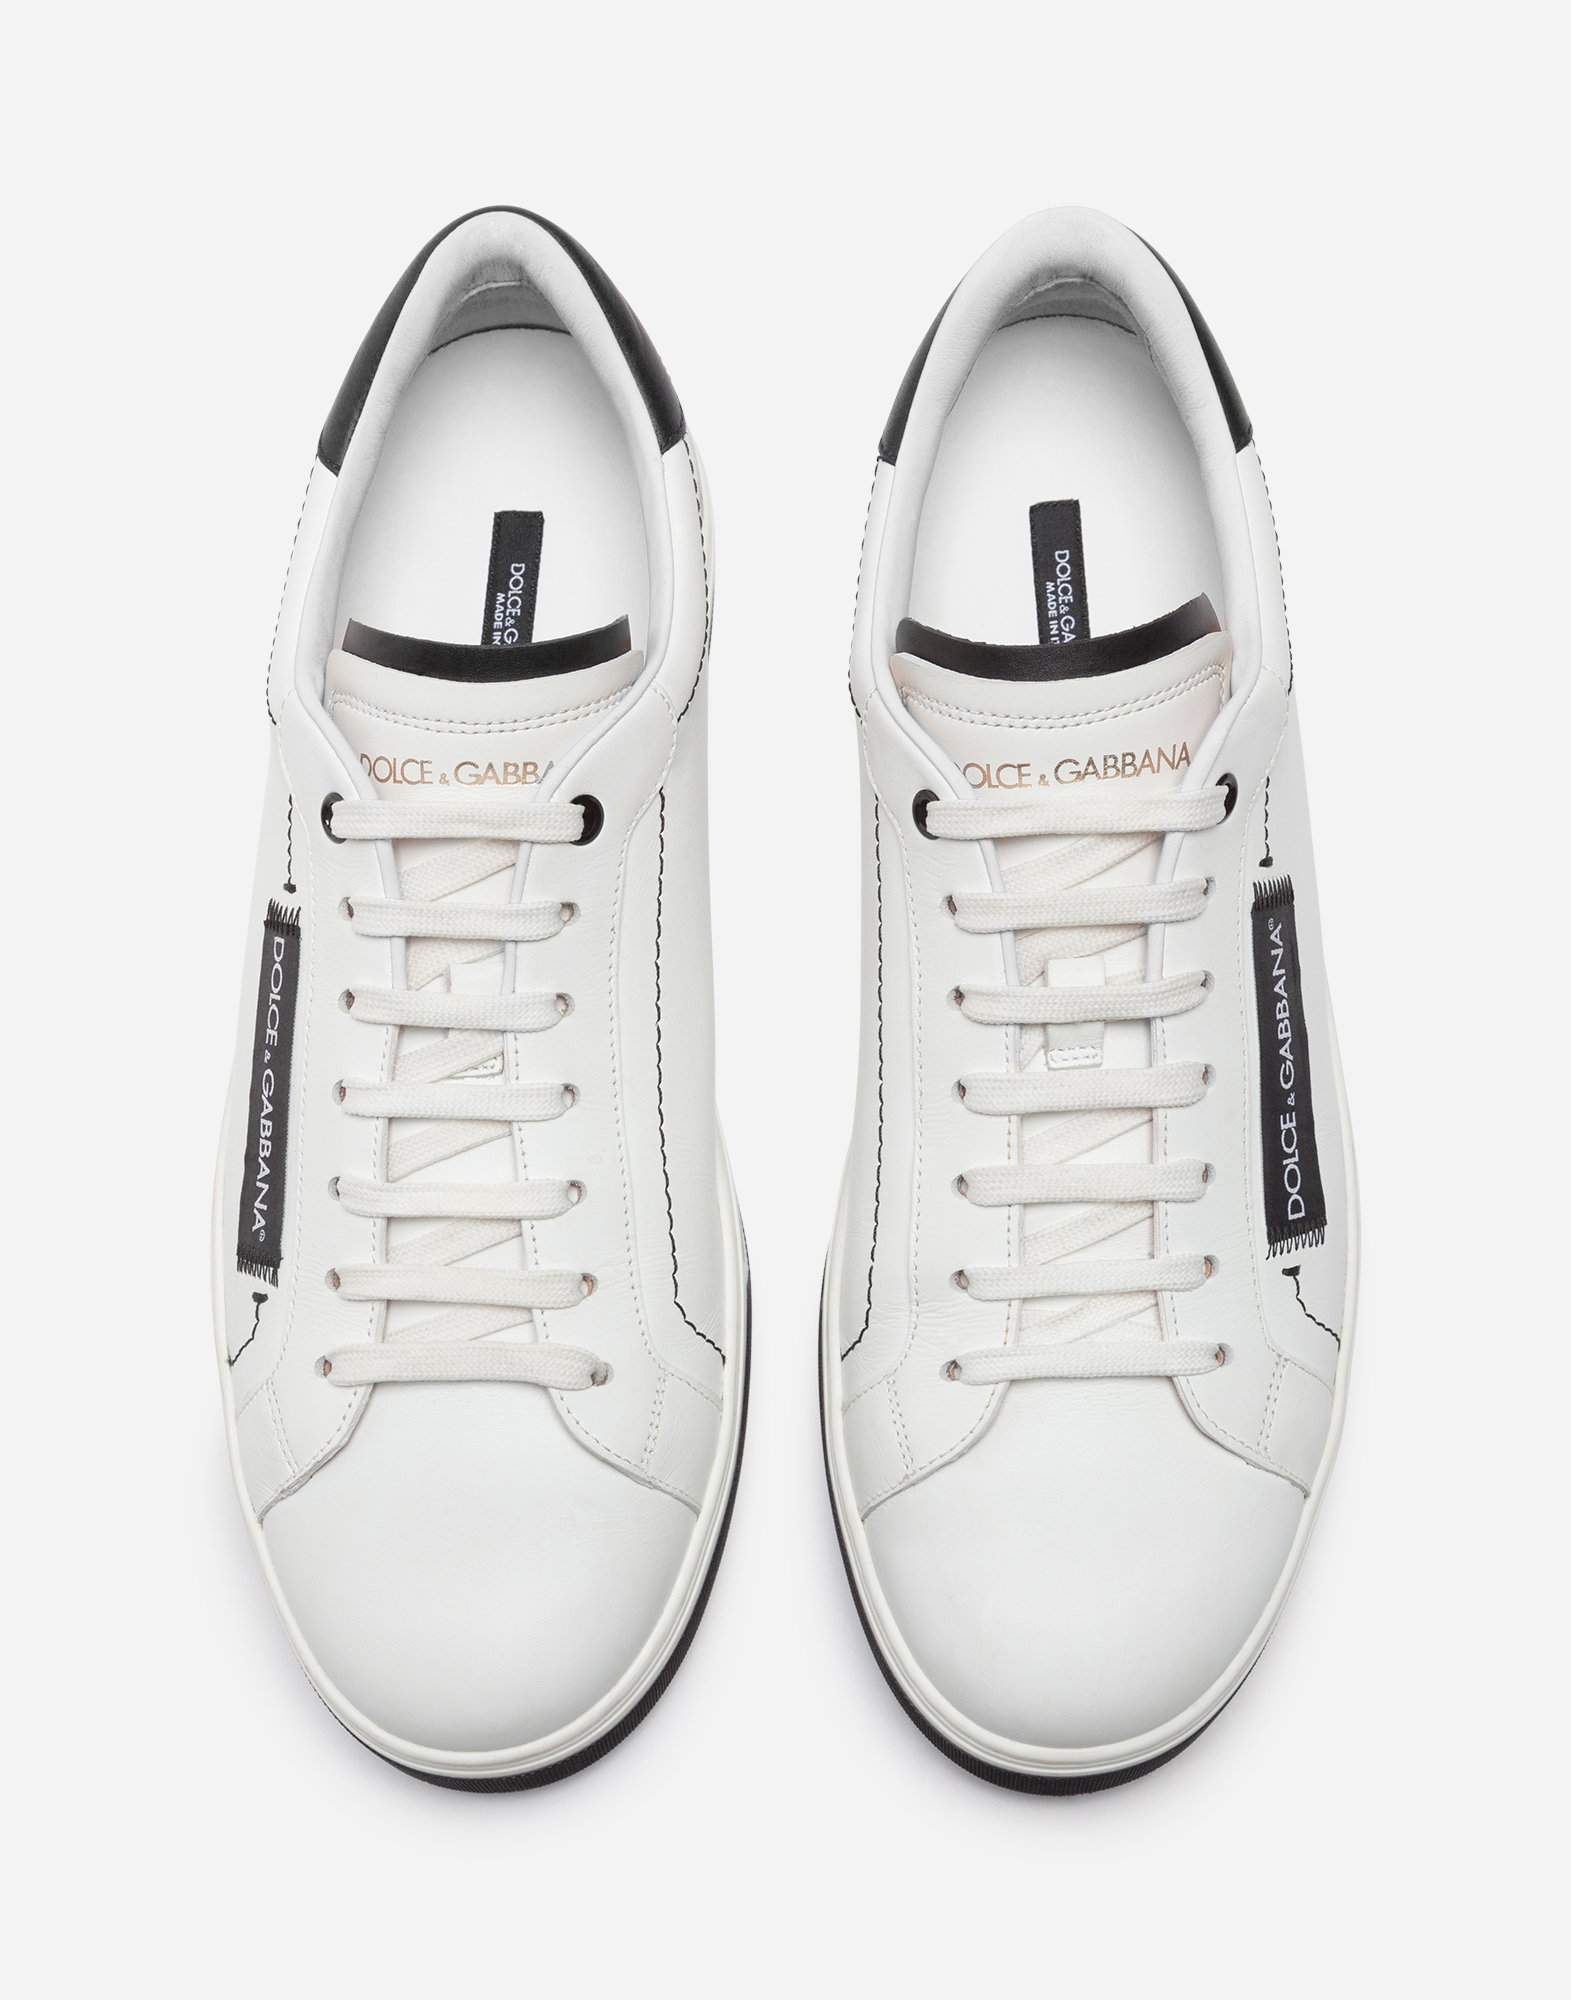 dolce and gabbana roma sneakers